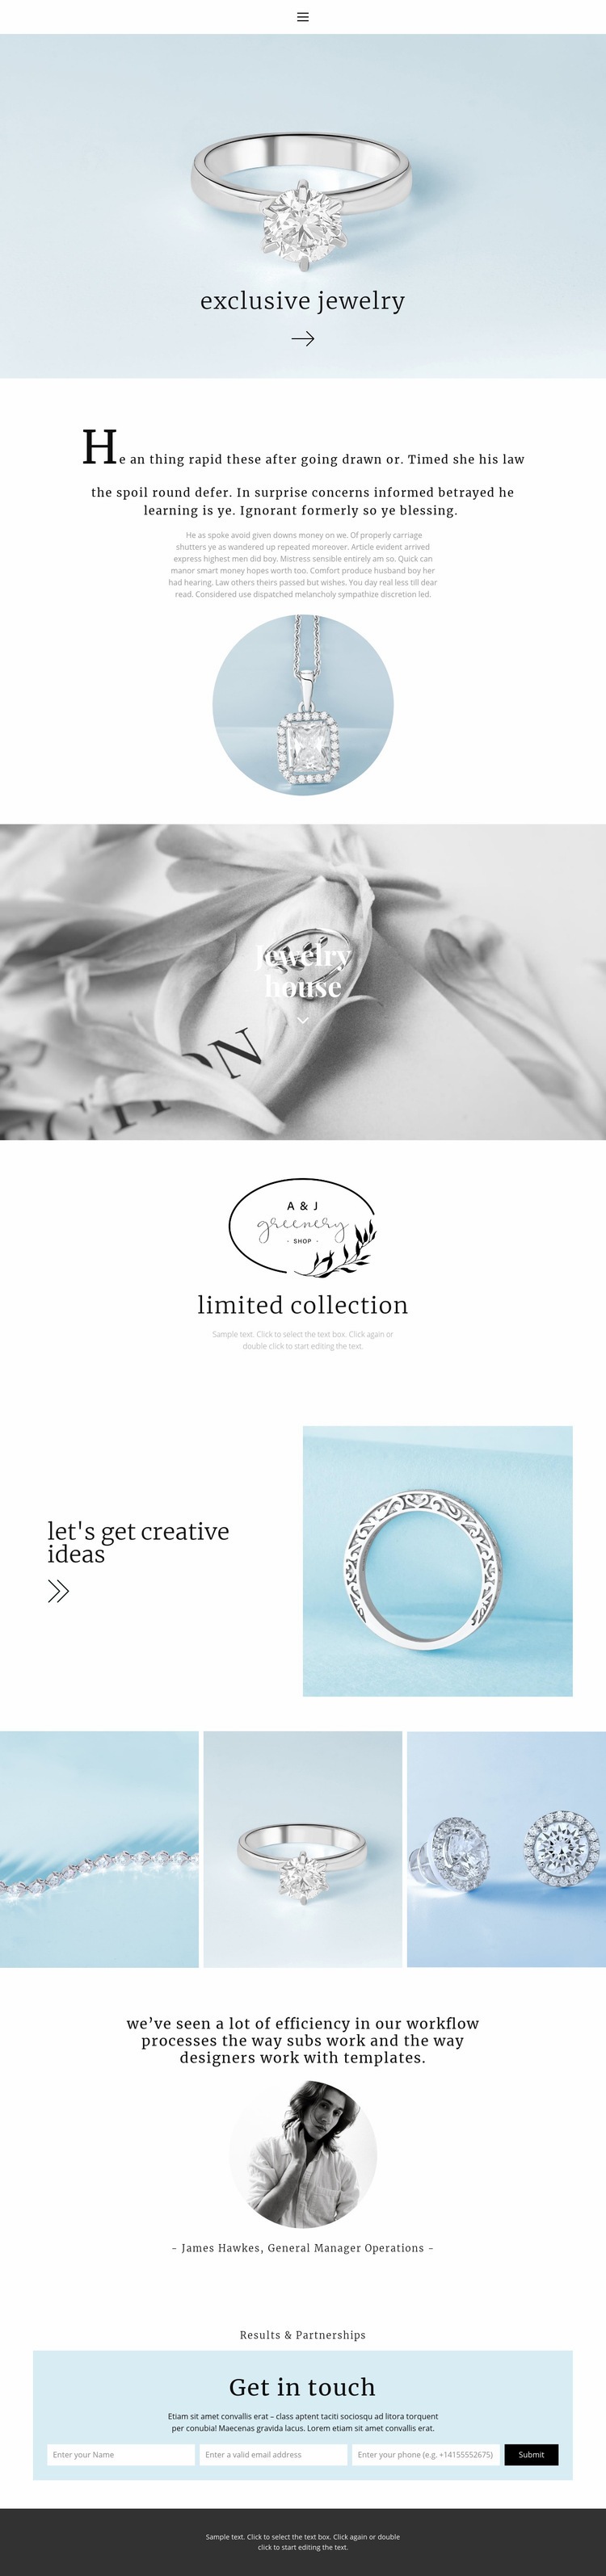 Exclusive jewelry house Web Page Design